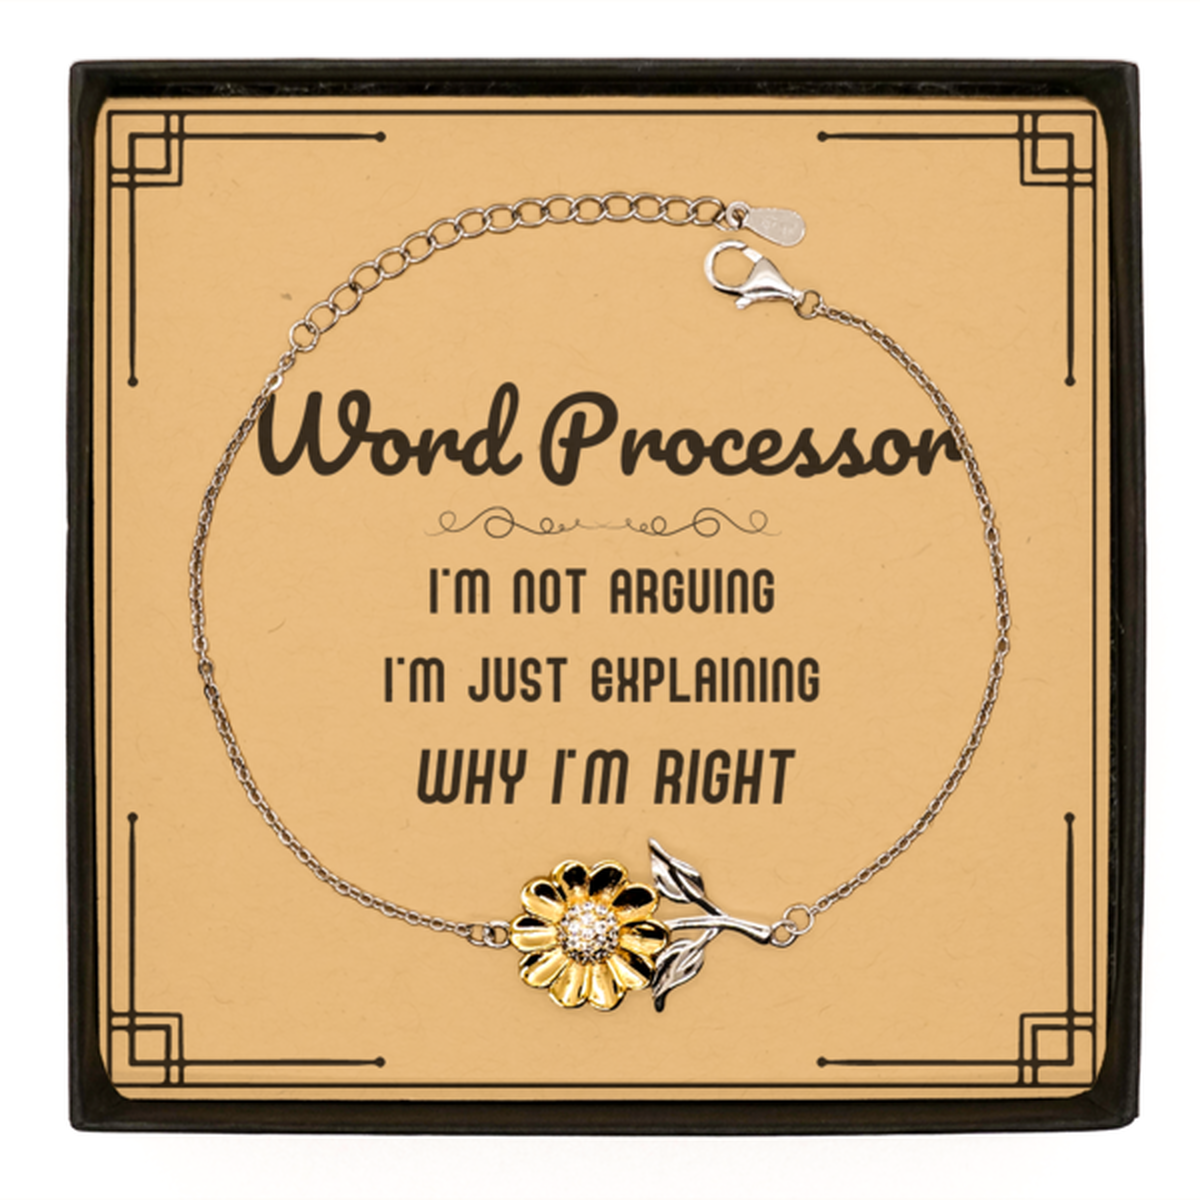 Word Processor I'm not Arguing. I'm Just Explaining Why I'm RIGHT Sunflower Bracelet, Funny Saying Quote Word Processor Gifts For Word Processor Message Card Graduation Birthday Christmas Gifts for Men Women Coworker